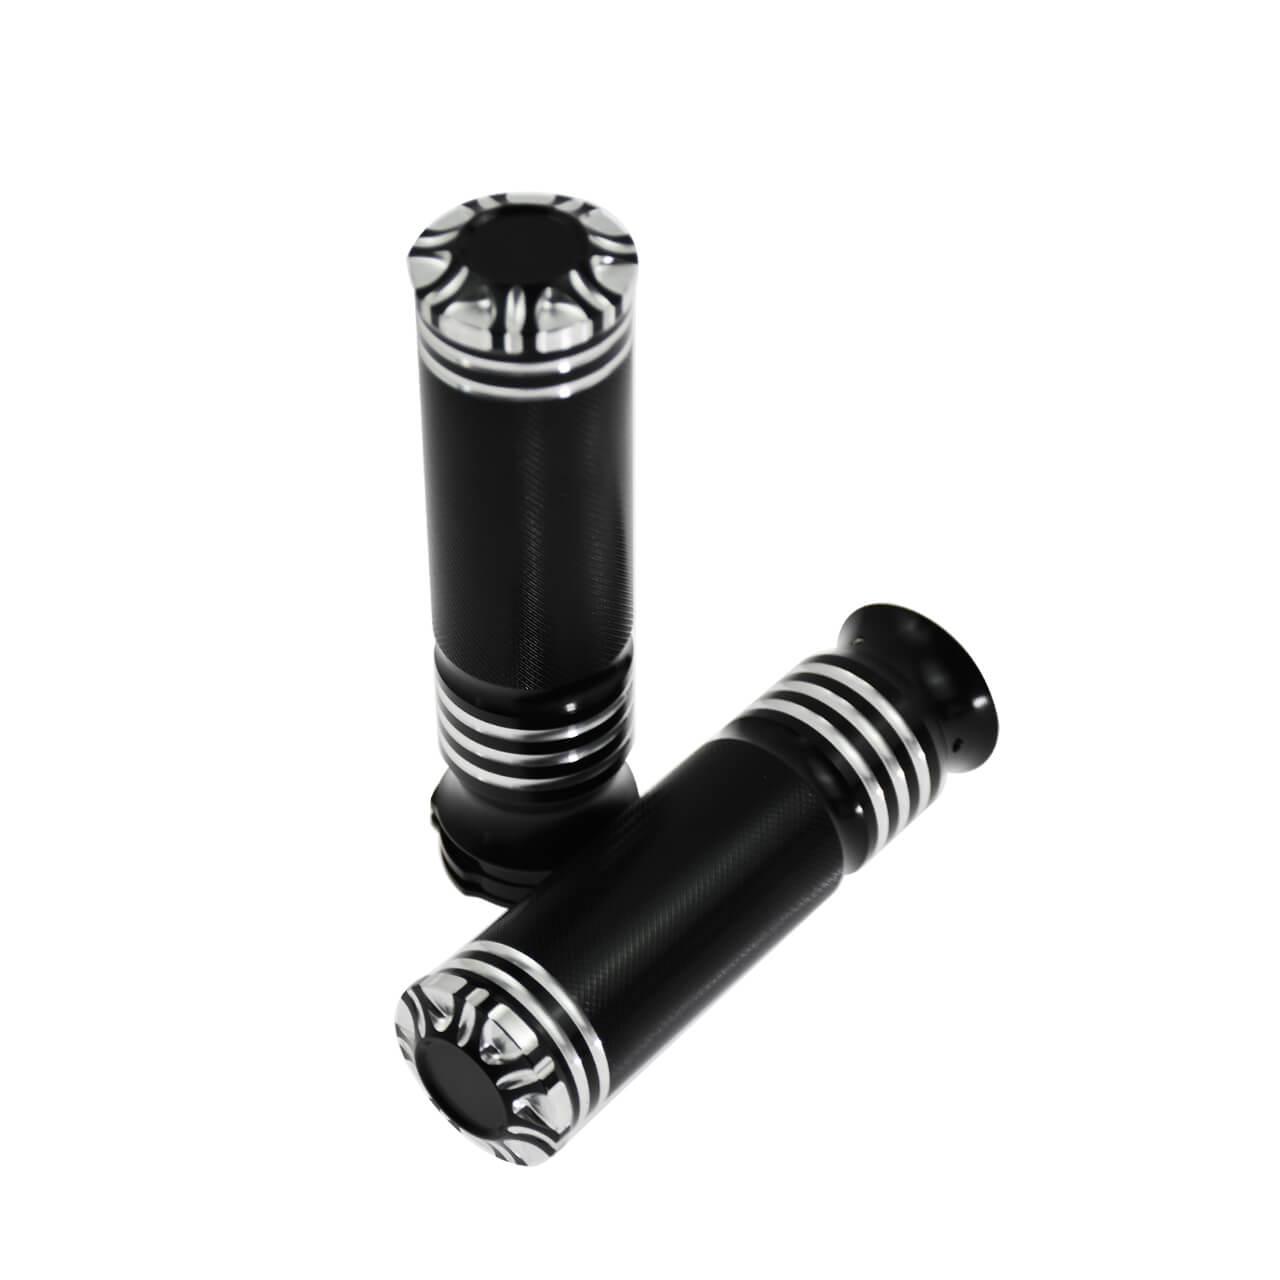 Black 1inch motorcycle handlebar grips with Mactions logo GP002502